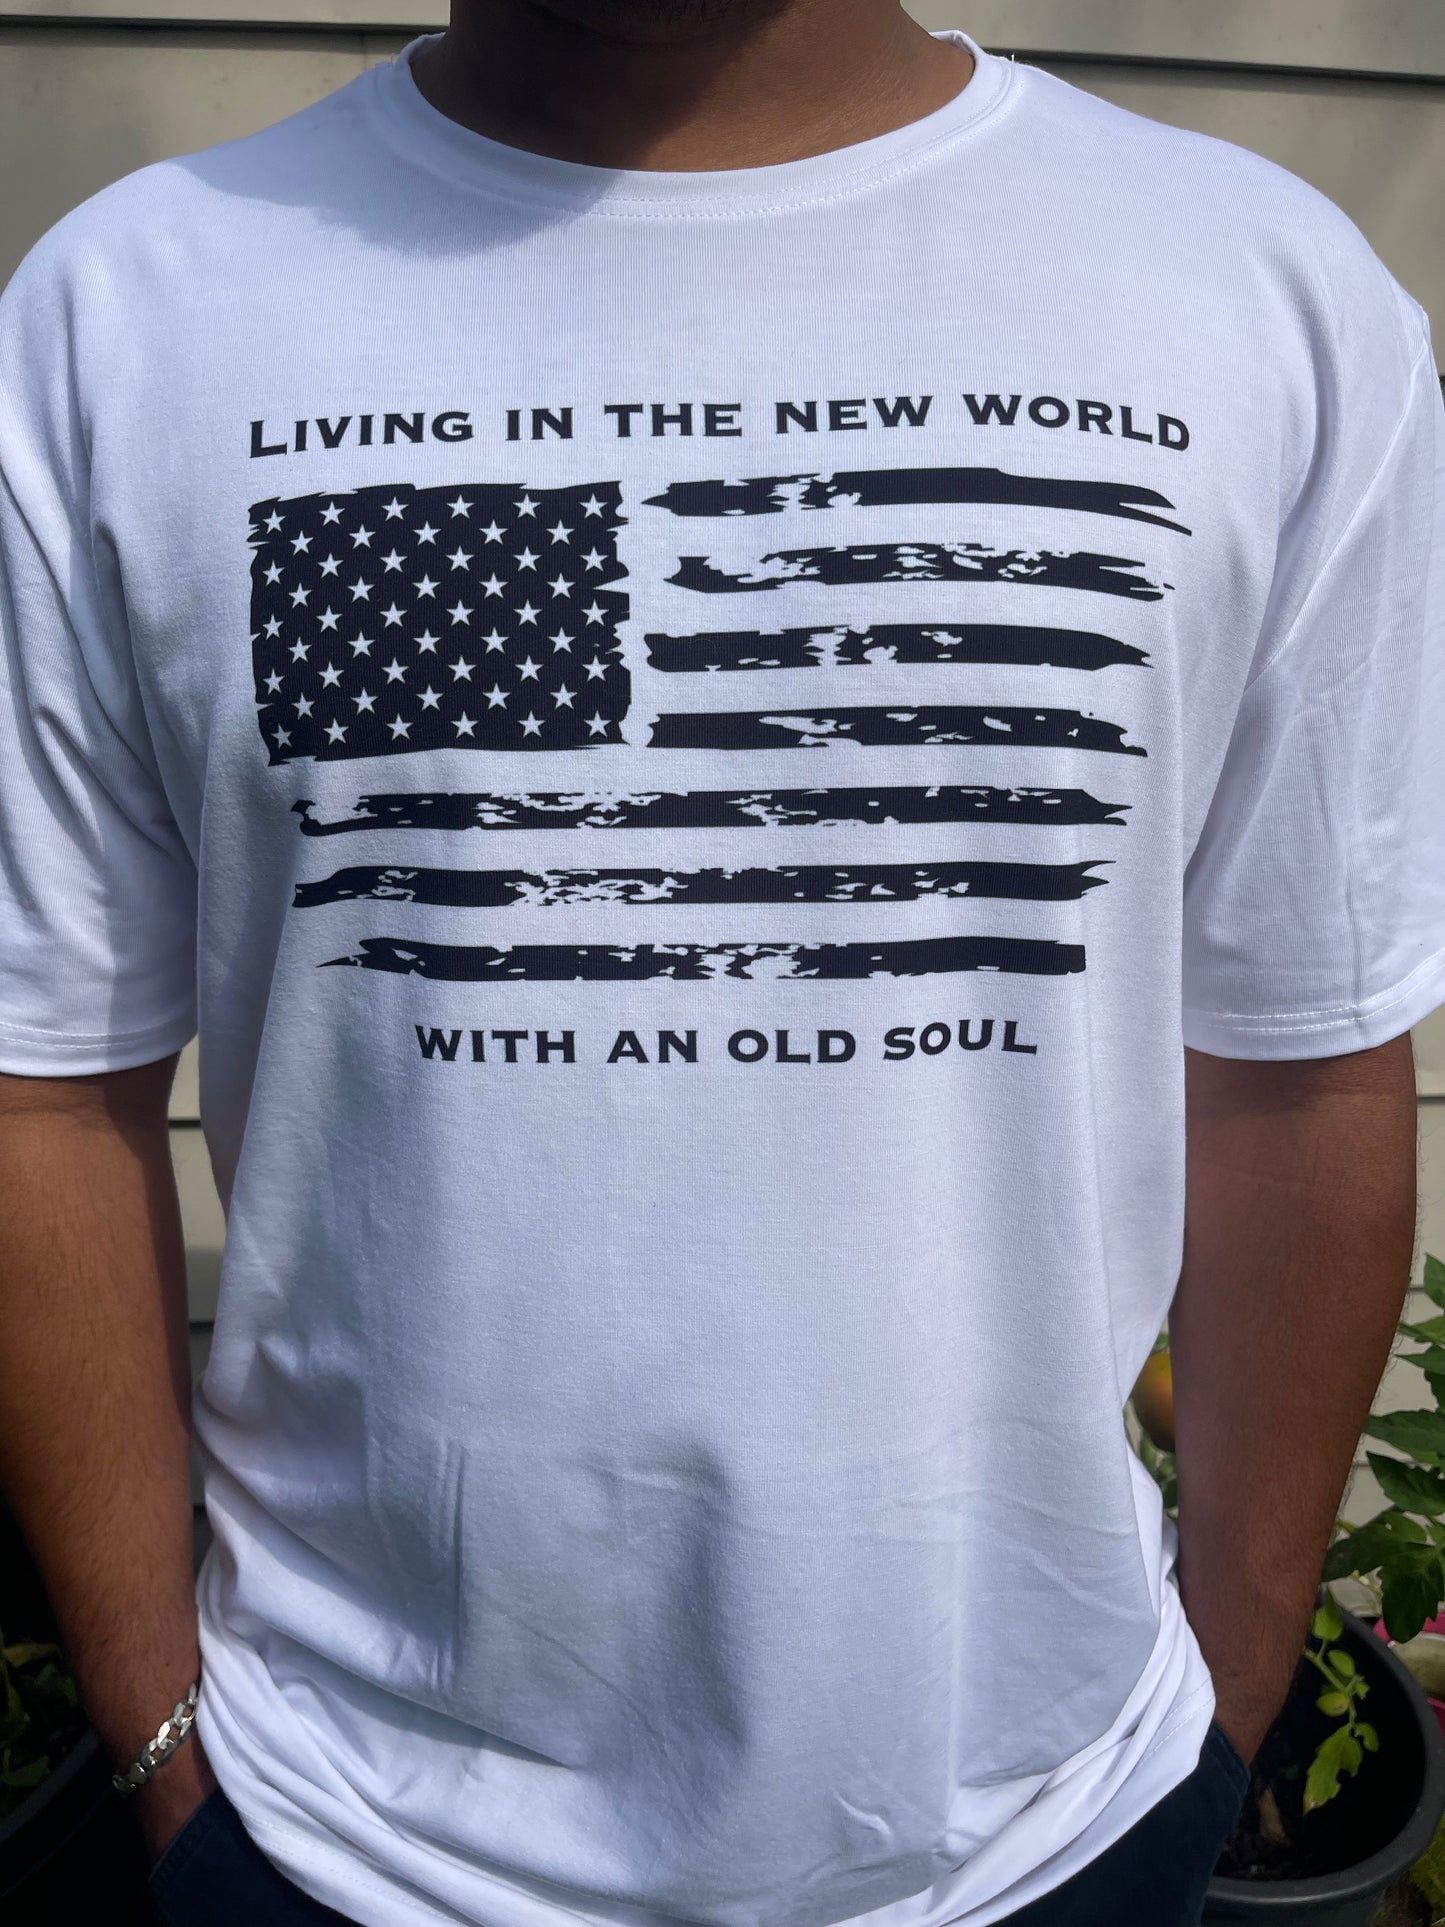 Living in the new world with an old soul tee